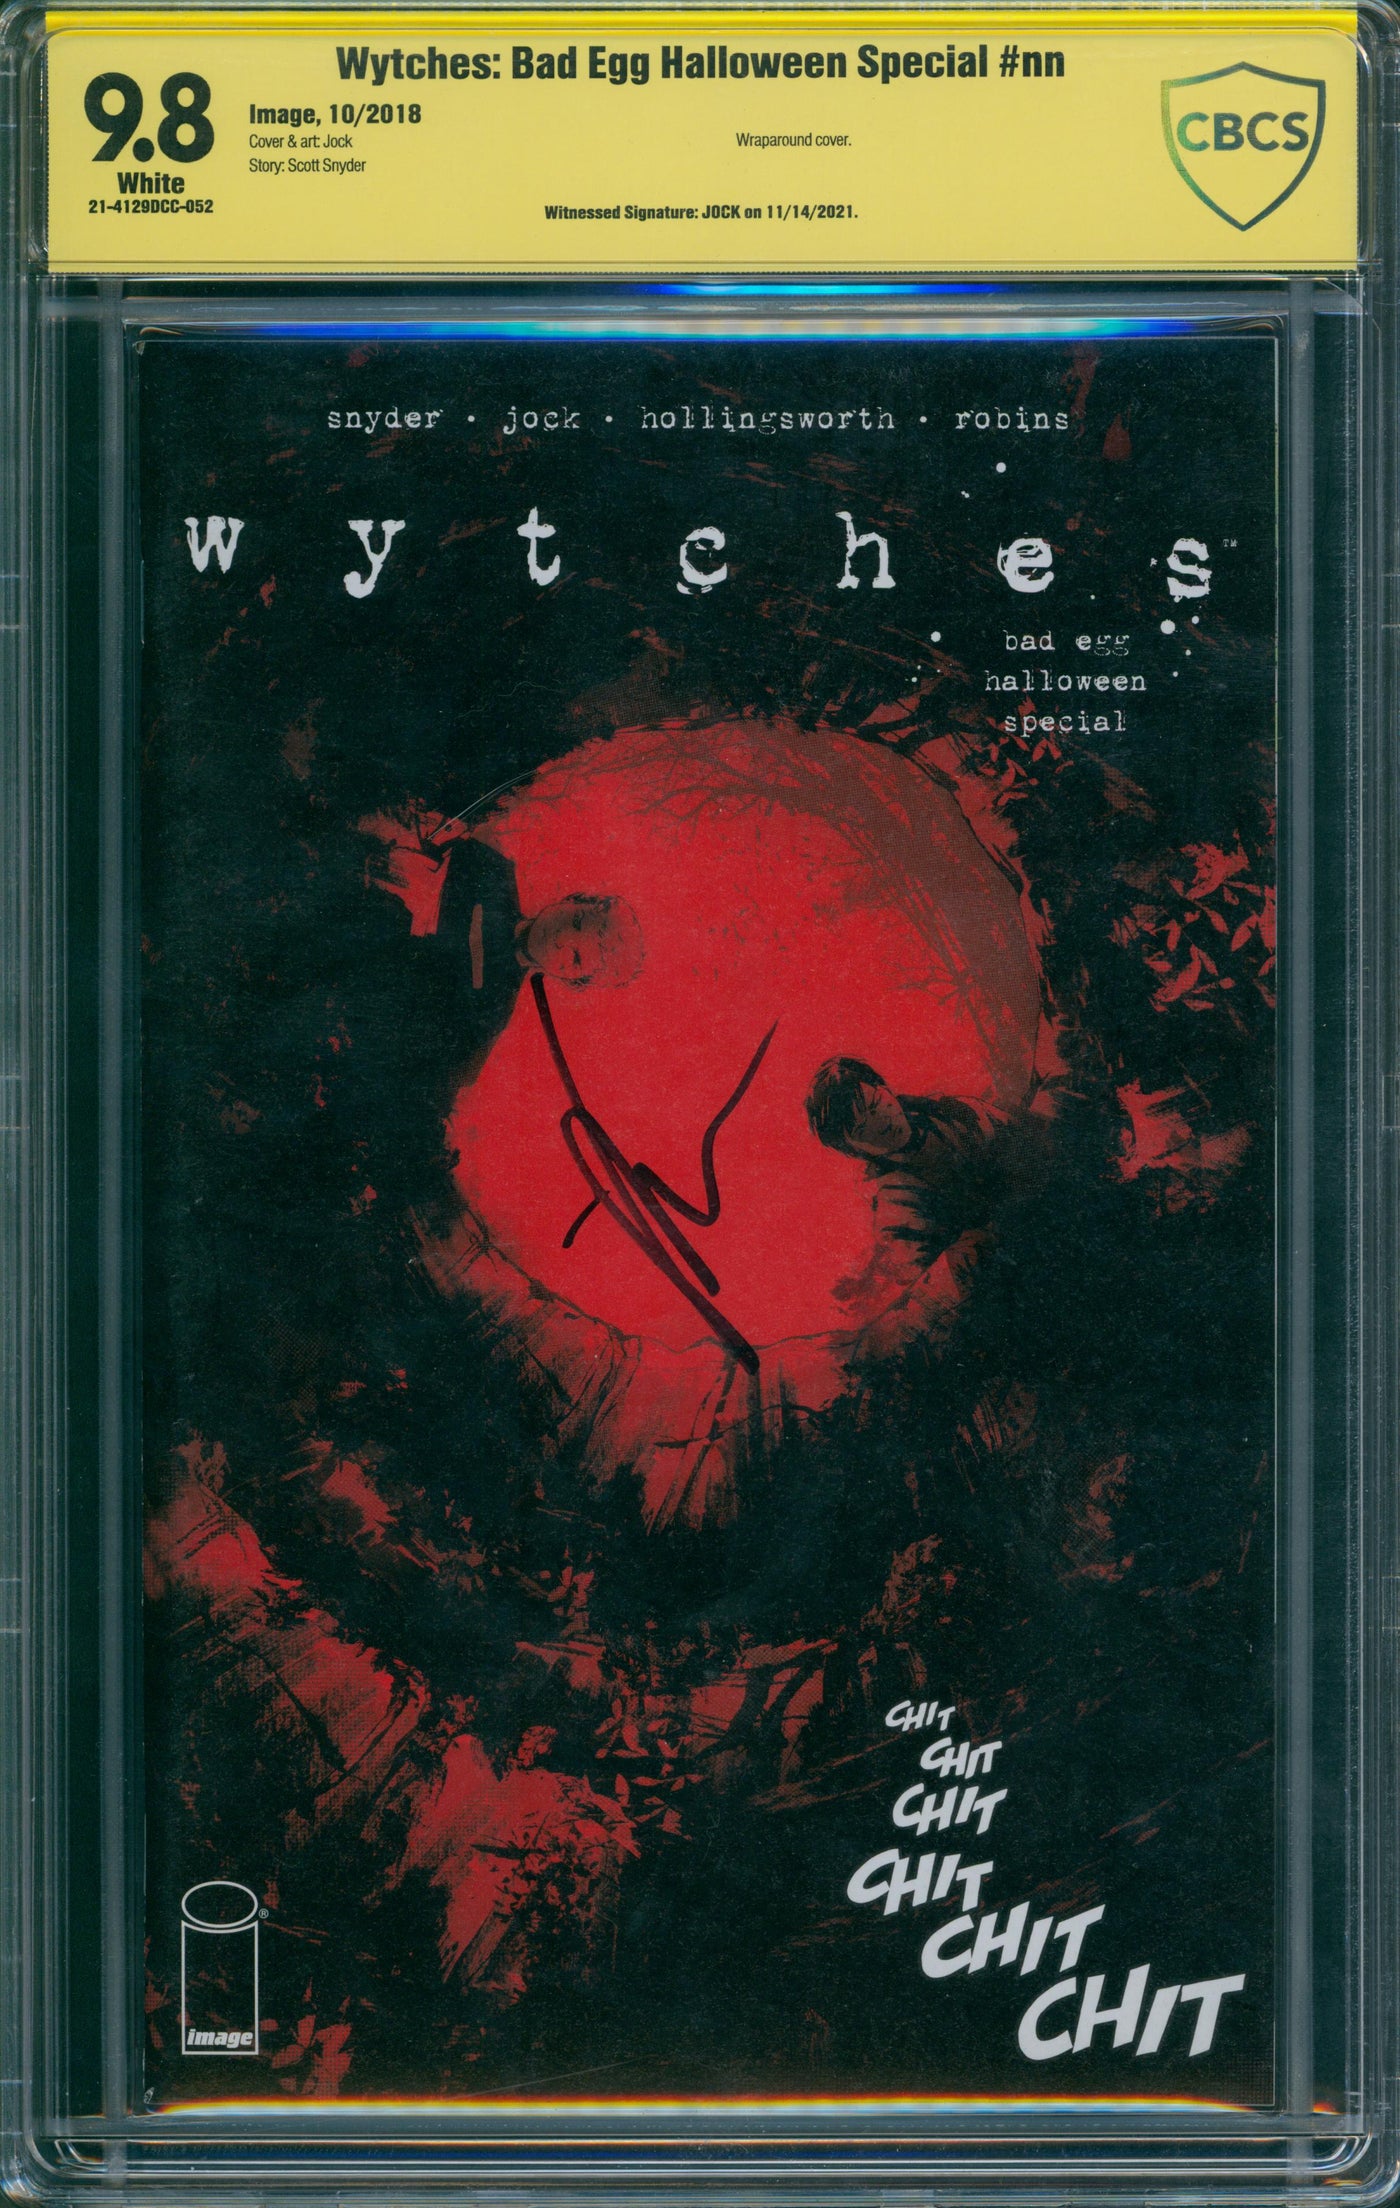 Wytches Bad Egg Halloween Special #nn CBCS 9.8